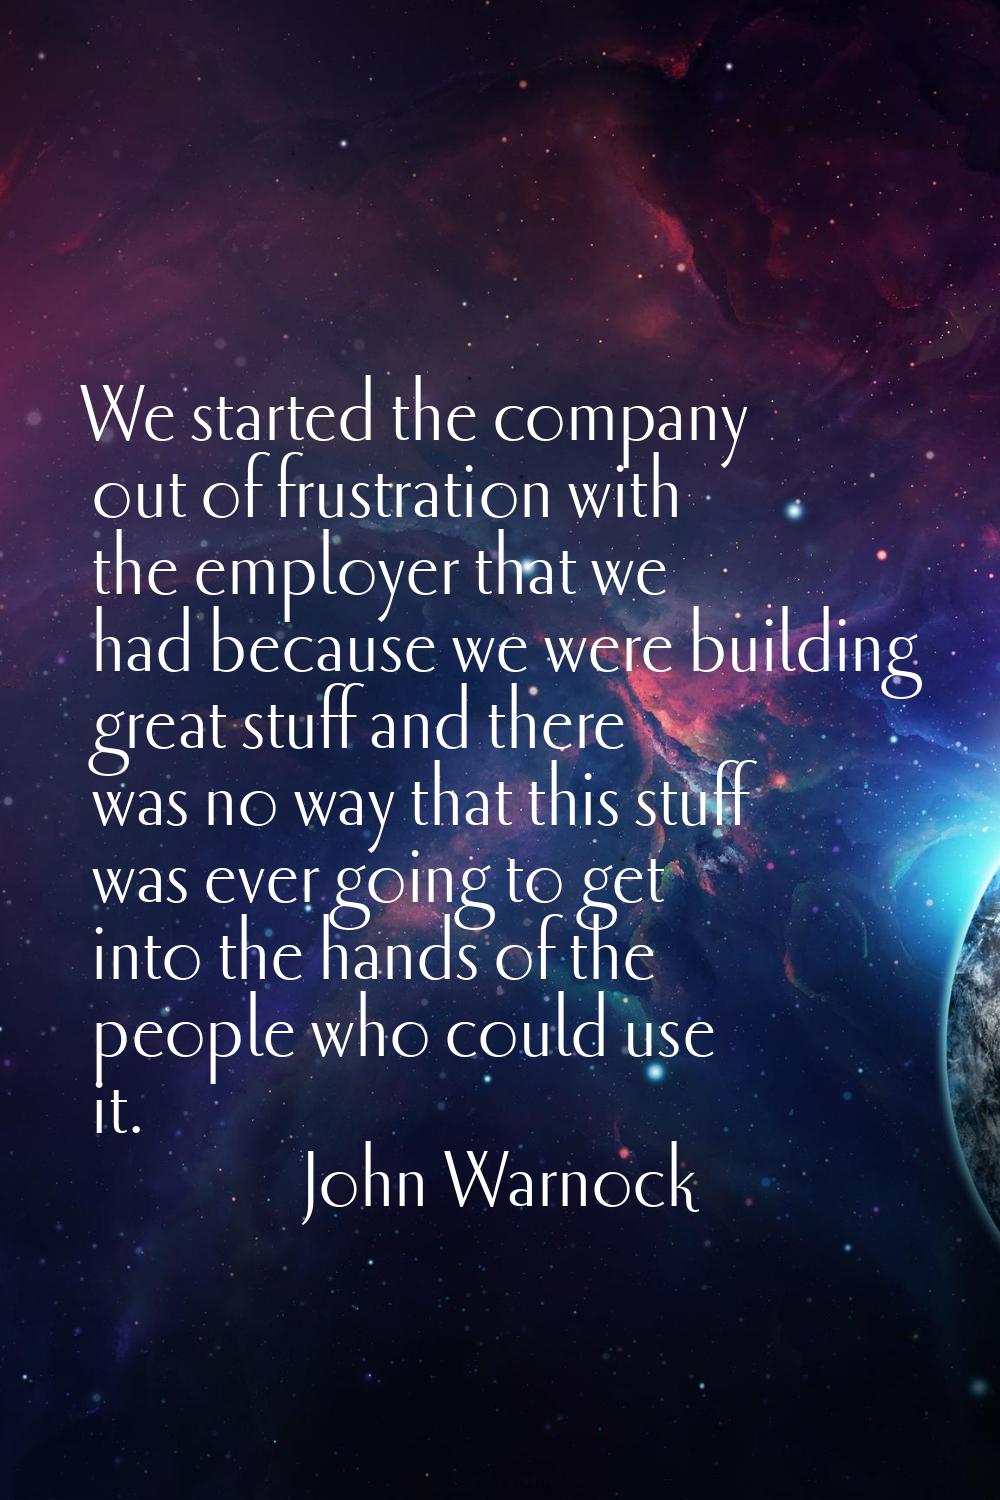 We started the company out of frustration with the employer that we had because we were building gr